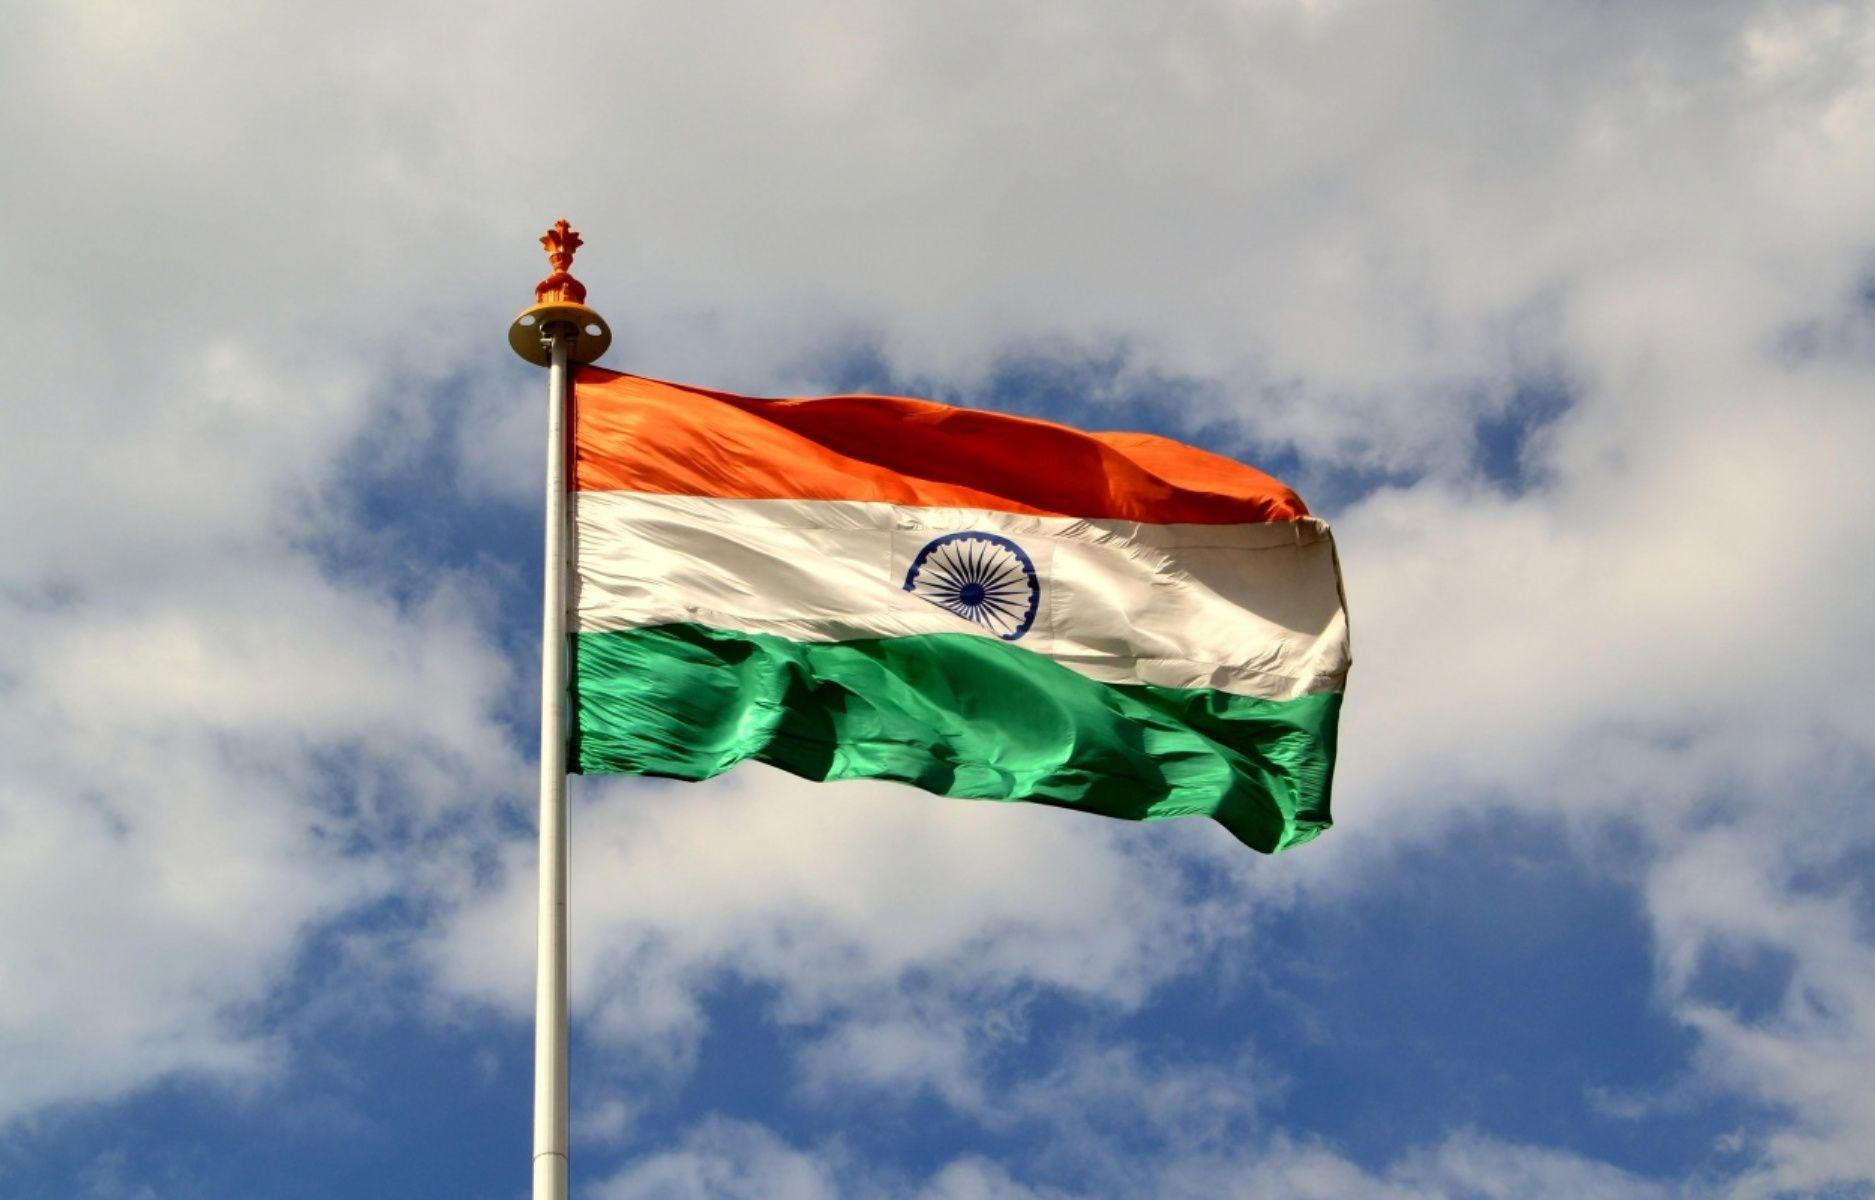 26 Indian Flag Image & Wallpapers That Makes Every Indian Proud